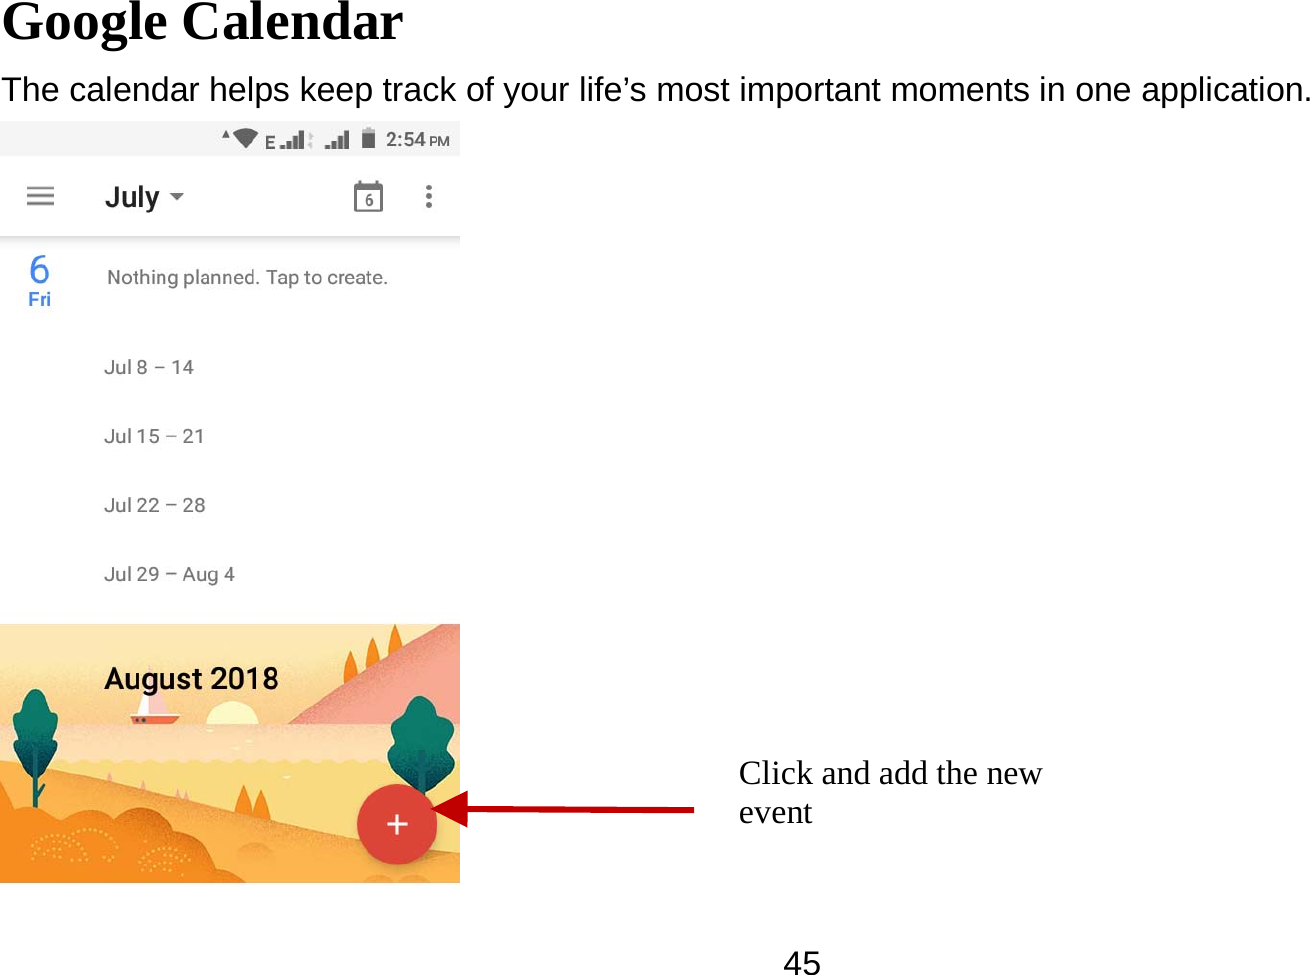   45Google Calendar The calendar helps keep track of your life’s most important moments in one application.    Click and add the new event   